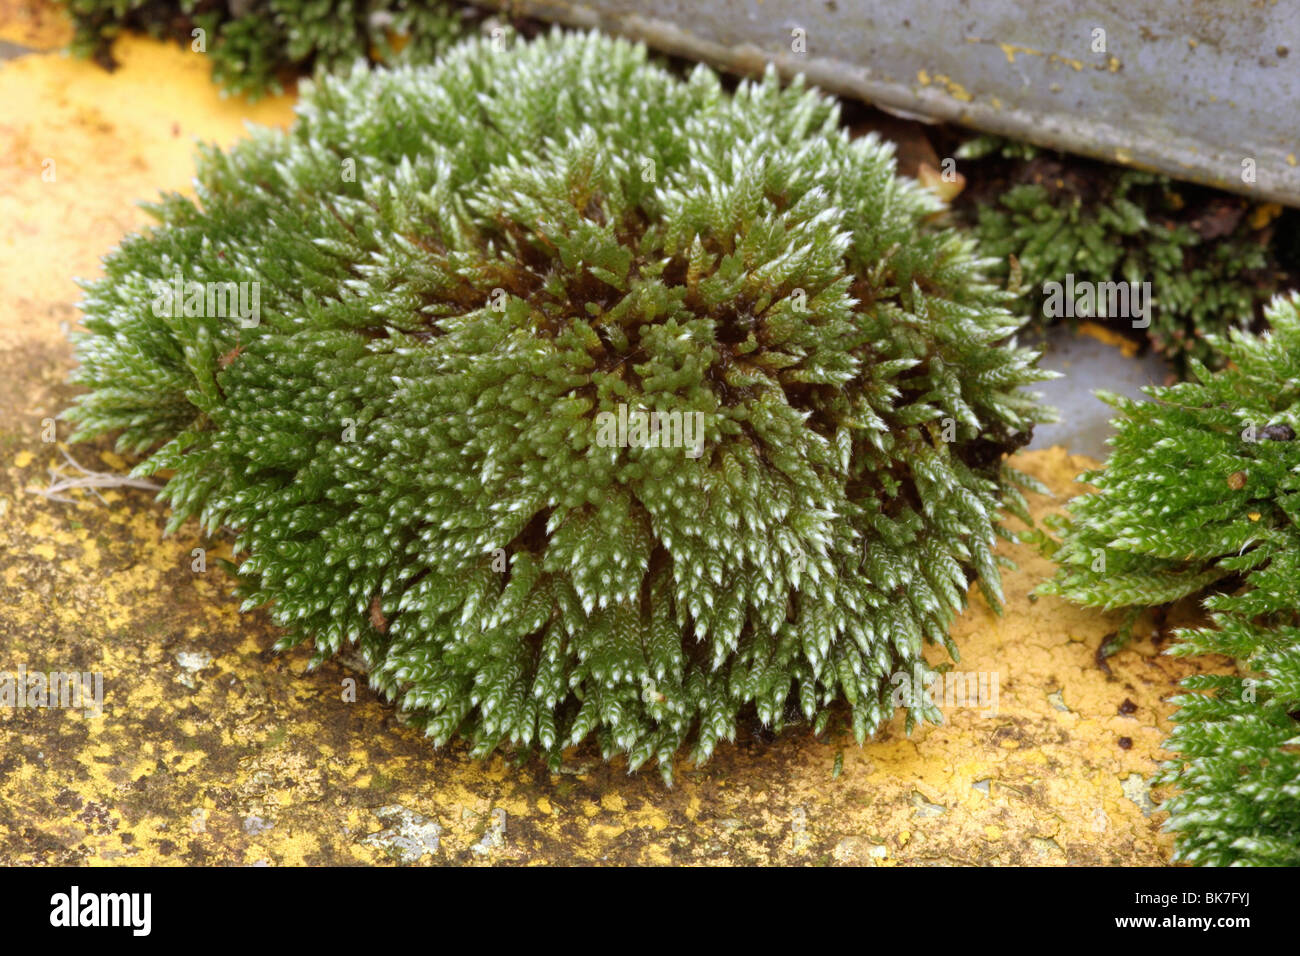 Silver moss (Bryum argenteum) growing on an abandoned car, UK. Stock Photo